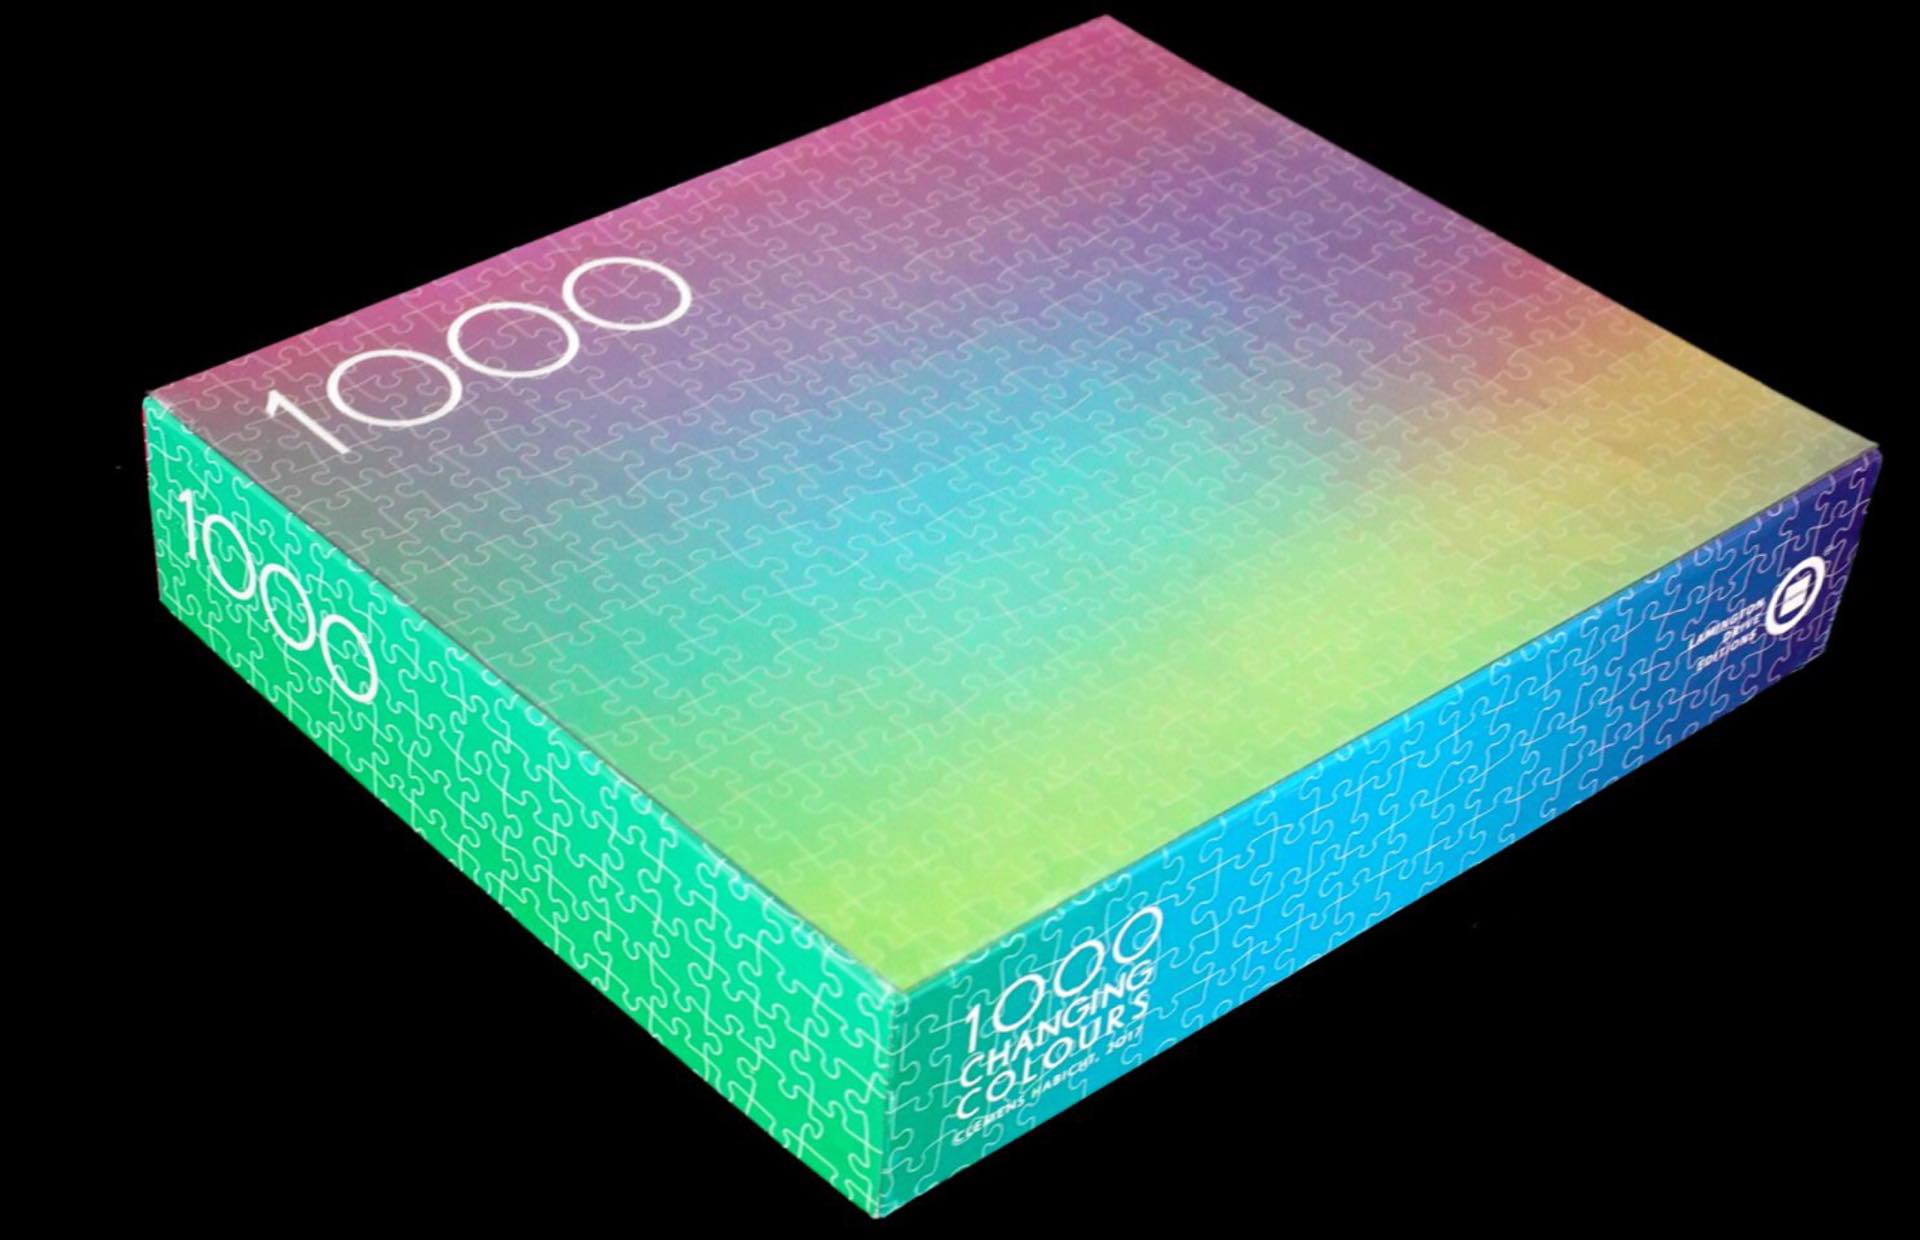 Clemens Habicht's “1000 Changing Colors” jigsaw puzzle. ($89)